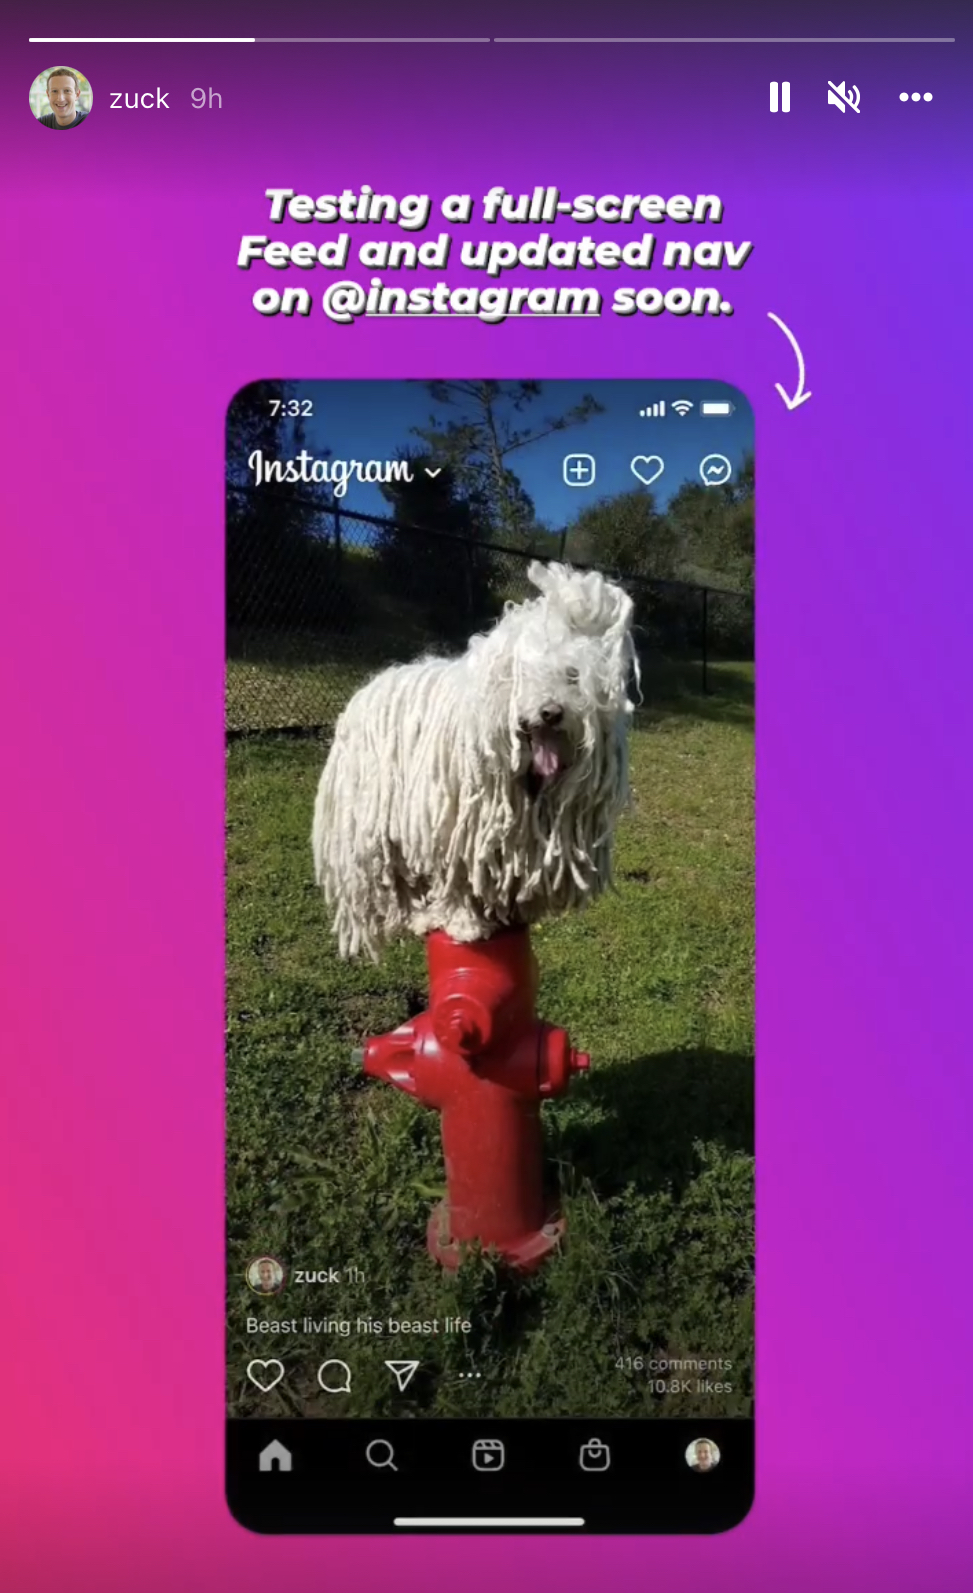 An image showing the proposed full screen feed on Instagram.